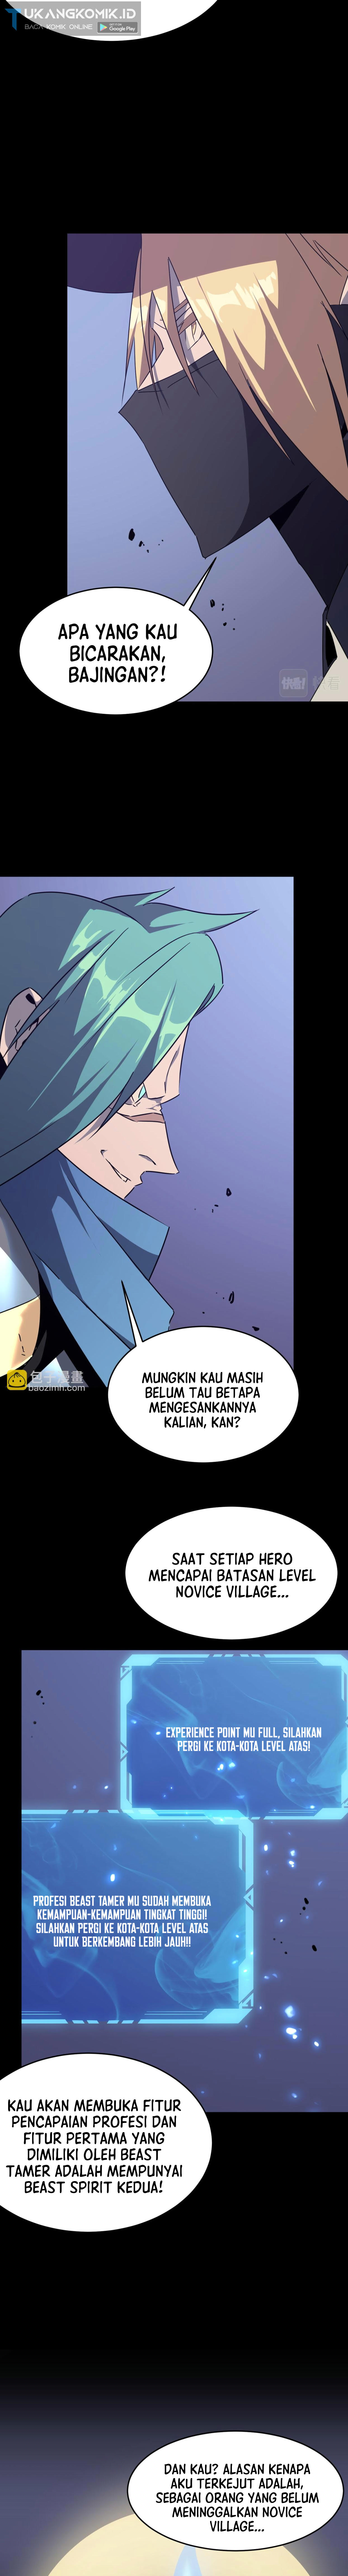 hero-watch-up Chapter 50